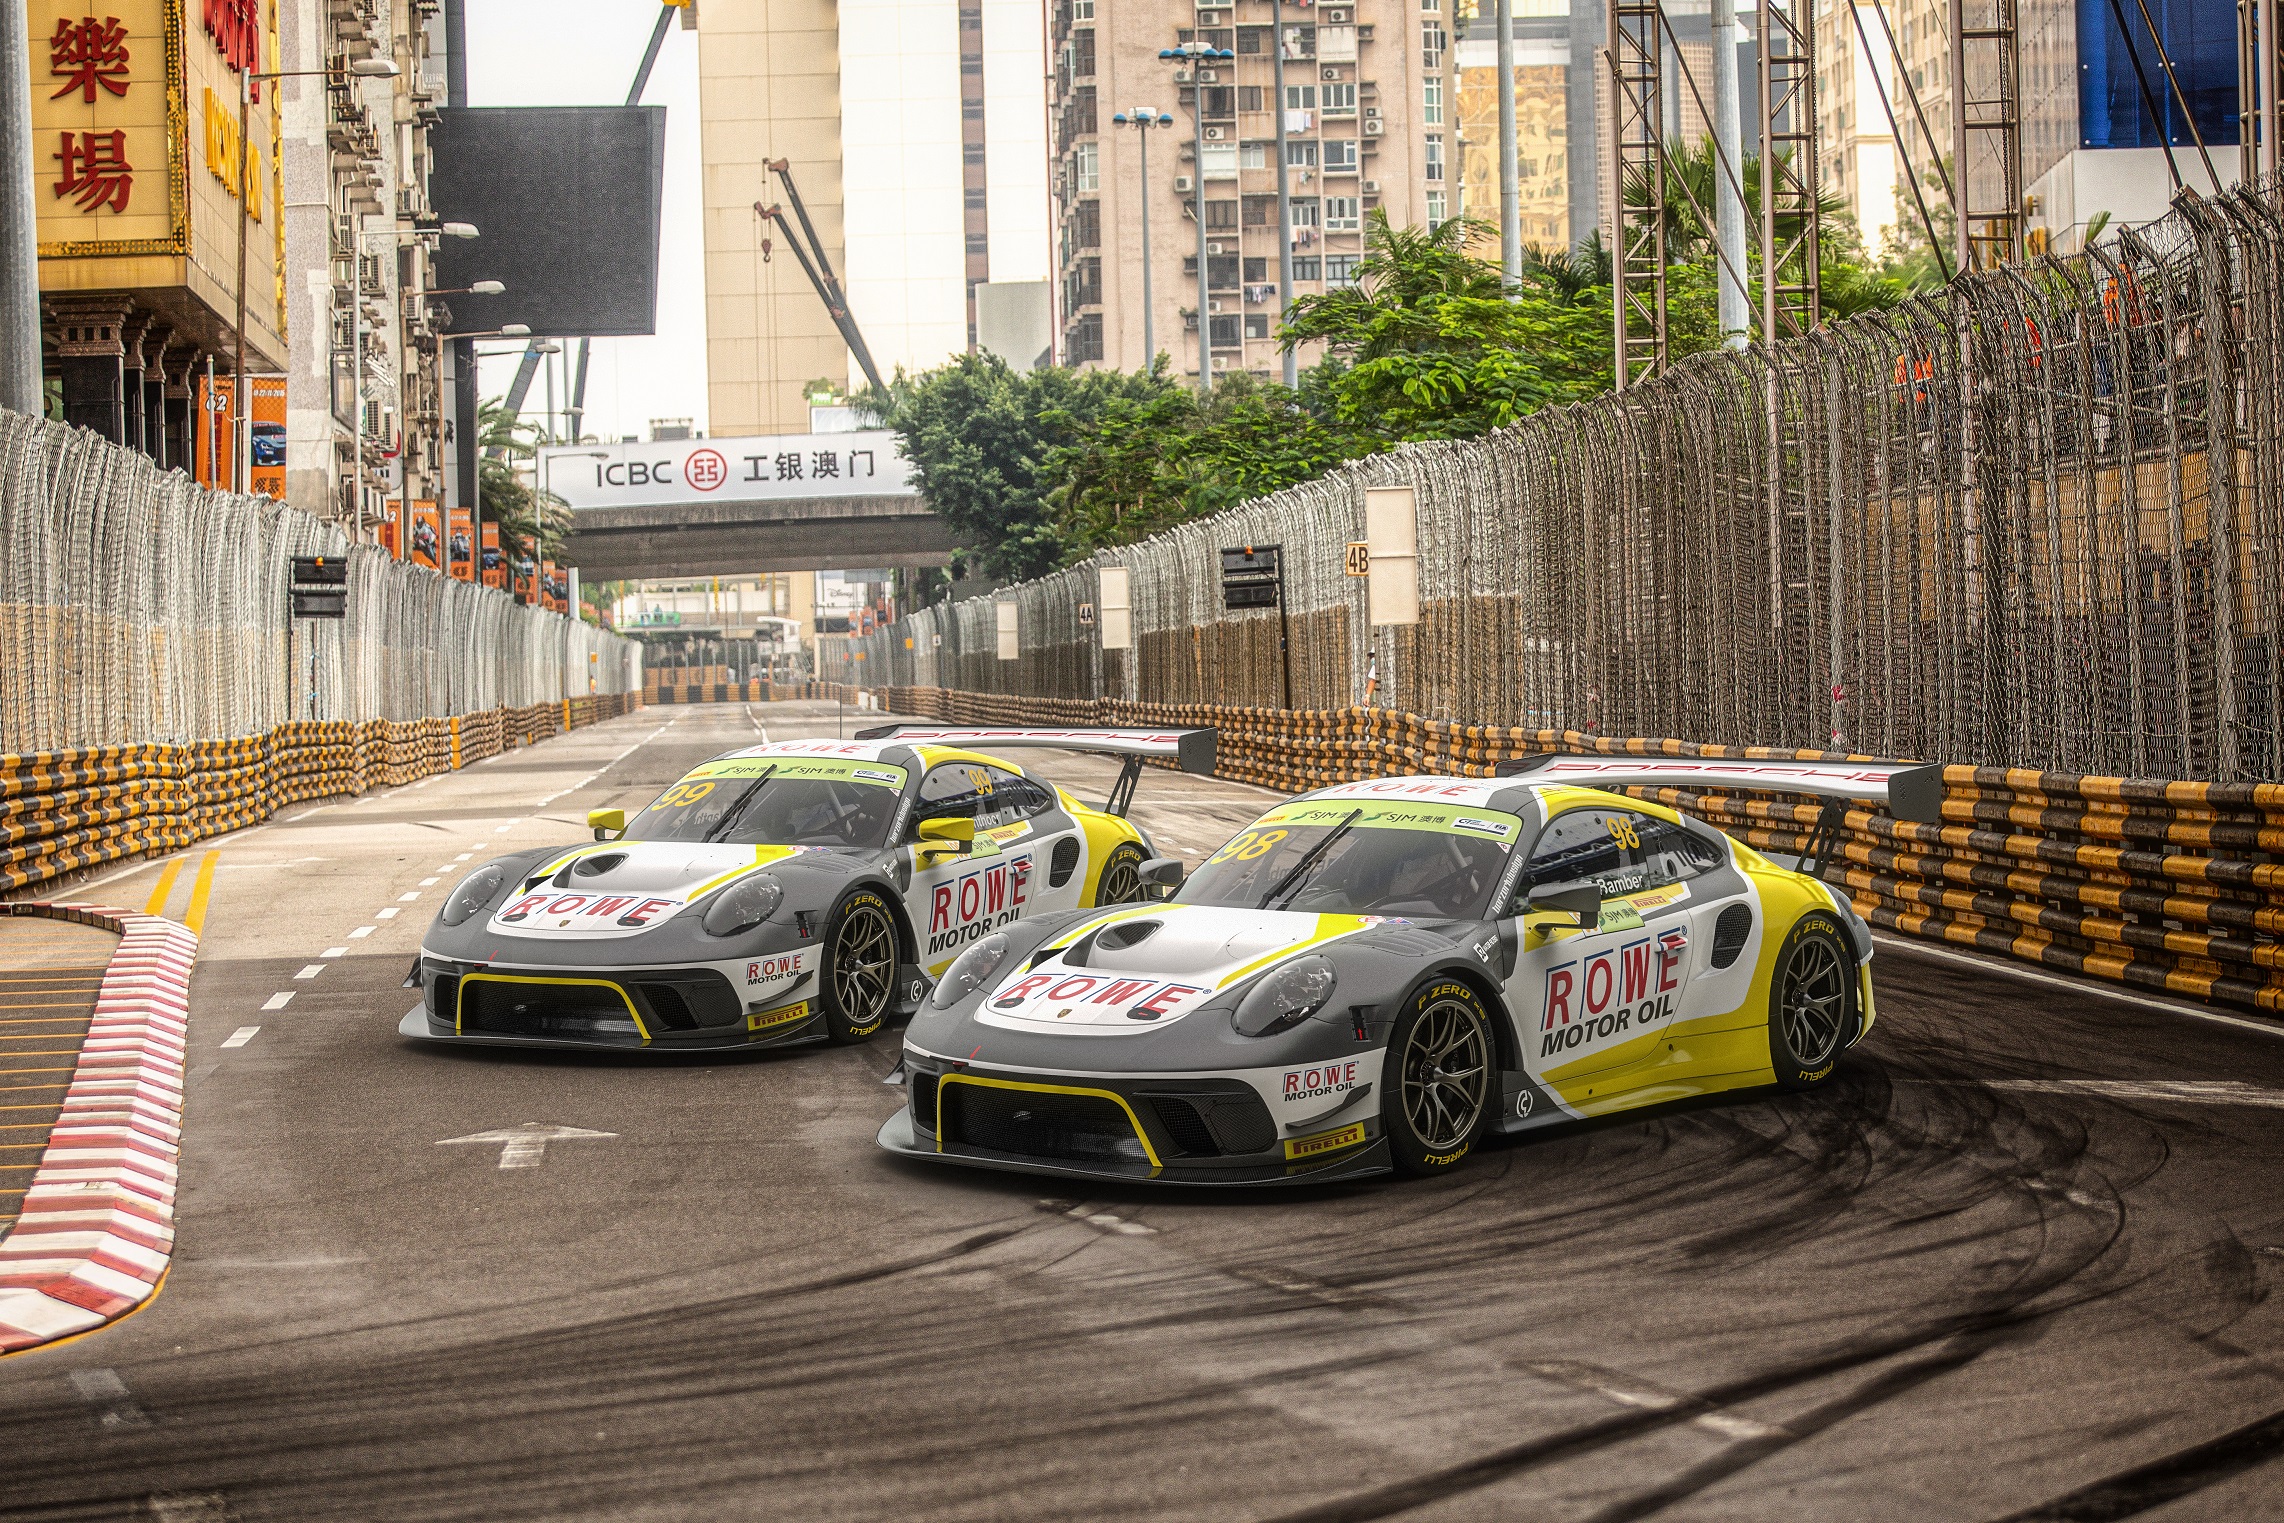 ROWE RACING out to hit the jackpot with Porsche in gamblers’ paradise